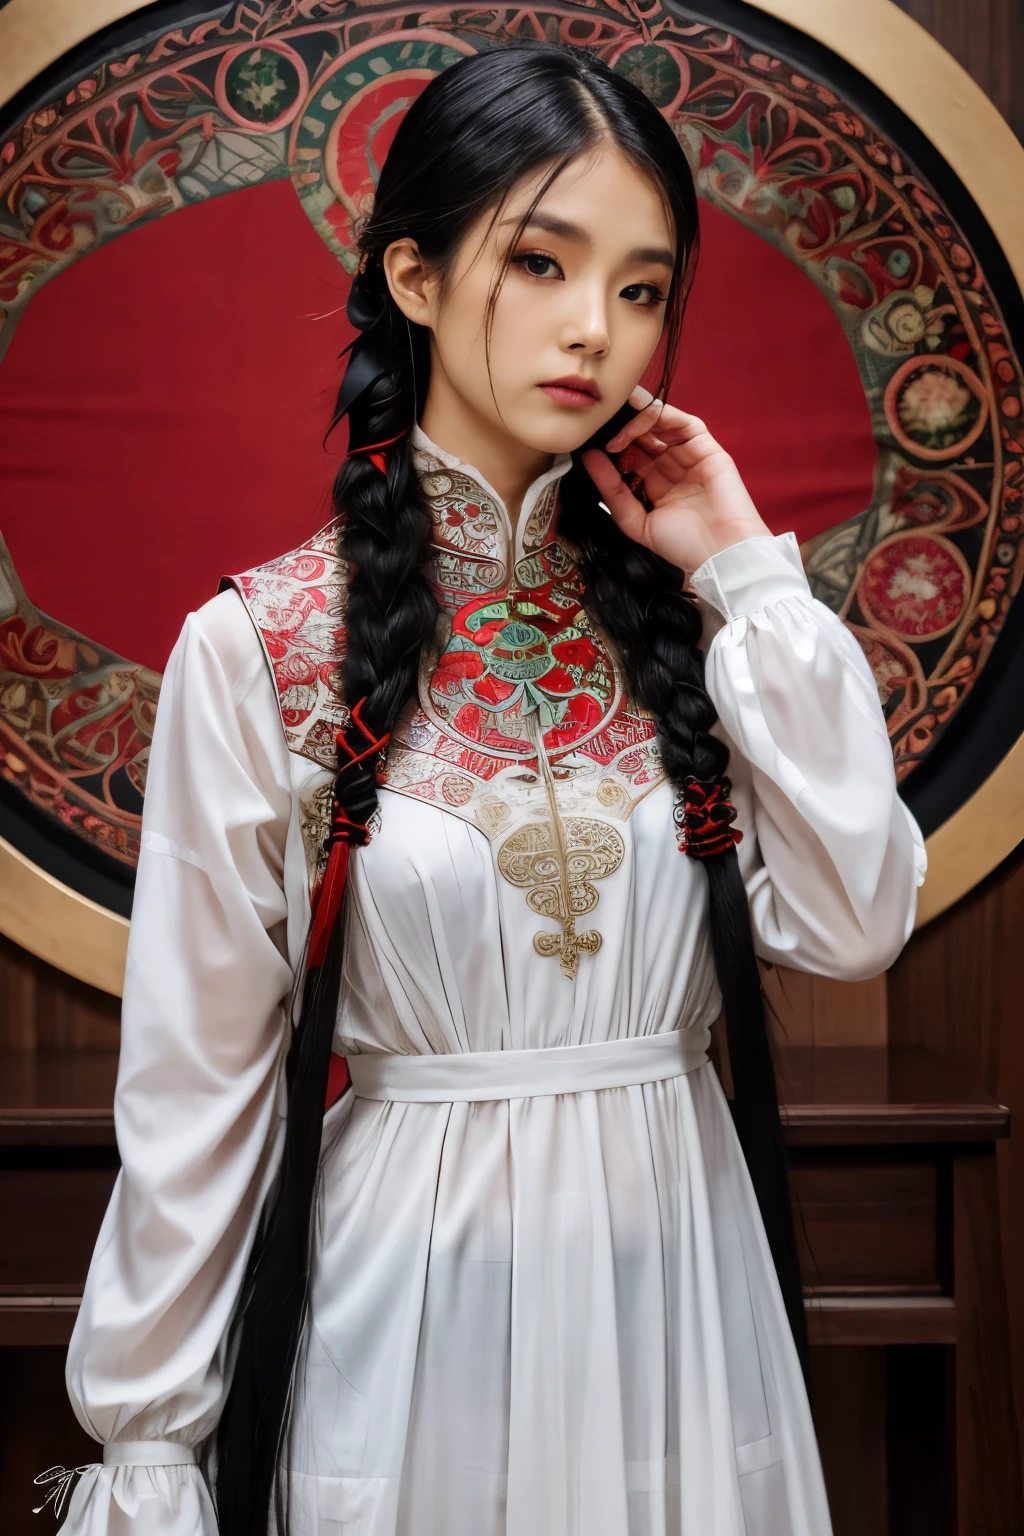 Girl 02, Shooting with Nikon Z7 II mirrorless camera,120mm F/4 Wide angle
Girl 02, 1girl in, Solo, Long hair, Looking at Viewer, Black hair, Long sleeves, braid
Wearing a white dress、Woman wearing black braid with blue and red pattern on neck, Chen Lu, art nouveau fashion embroidered, Portrait of character, Delaying Americanism、Holding an old map in one hand、
Woman wearing black top and red scarf with red and white design around neck, Chen Ji, art nouveau fashion embroidered, Silkscreen, Shippo Doctrine
Highest quality, masutepiece, ultra-detailliert, Cowboy Shot, flowing, 3DMM, ink sketch, color ink, Ink Rendering, Octane Render, pastels, rice paper, 1girl in, Beautiful detailed eyes, (alternate hairstyle), ultra-detailed hair, Graceful, (Charming), (Delicate), Pretty, Cute, Lace dress, The text in the center of the frame, Rhythm, Fantasy, Looking at Viewer,